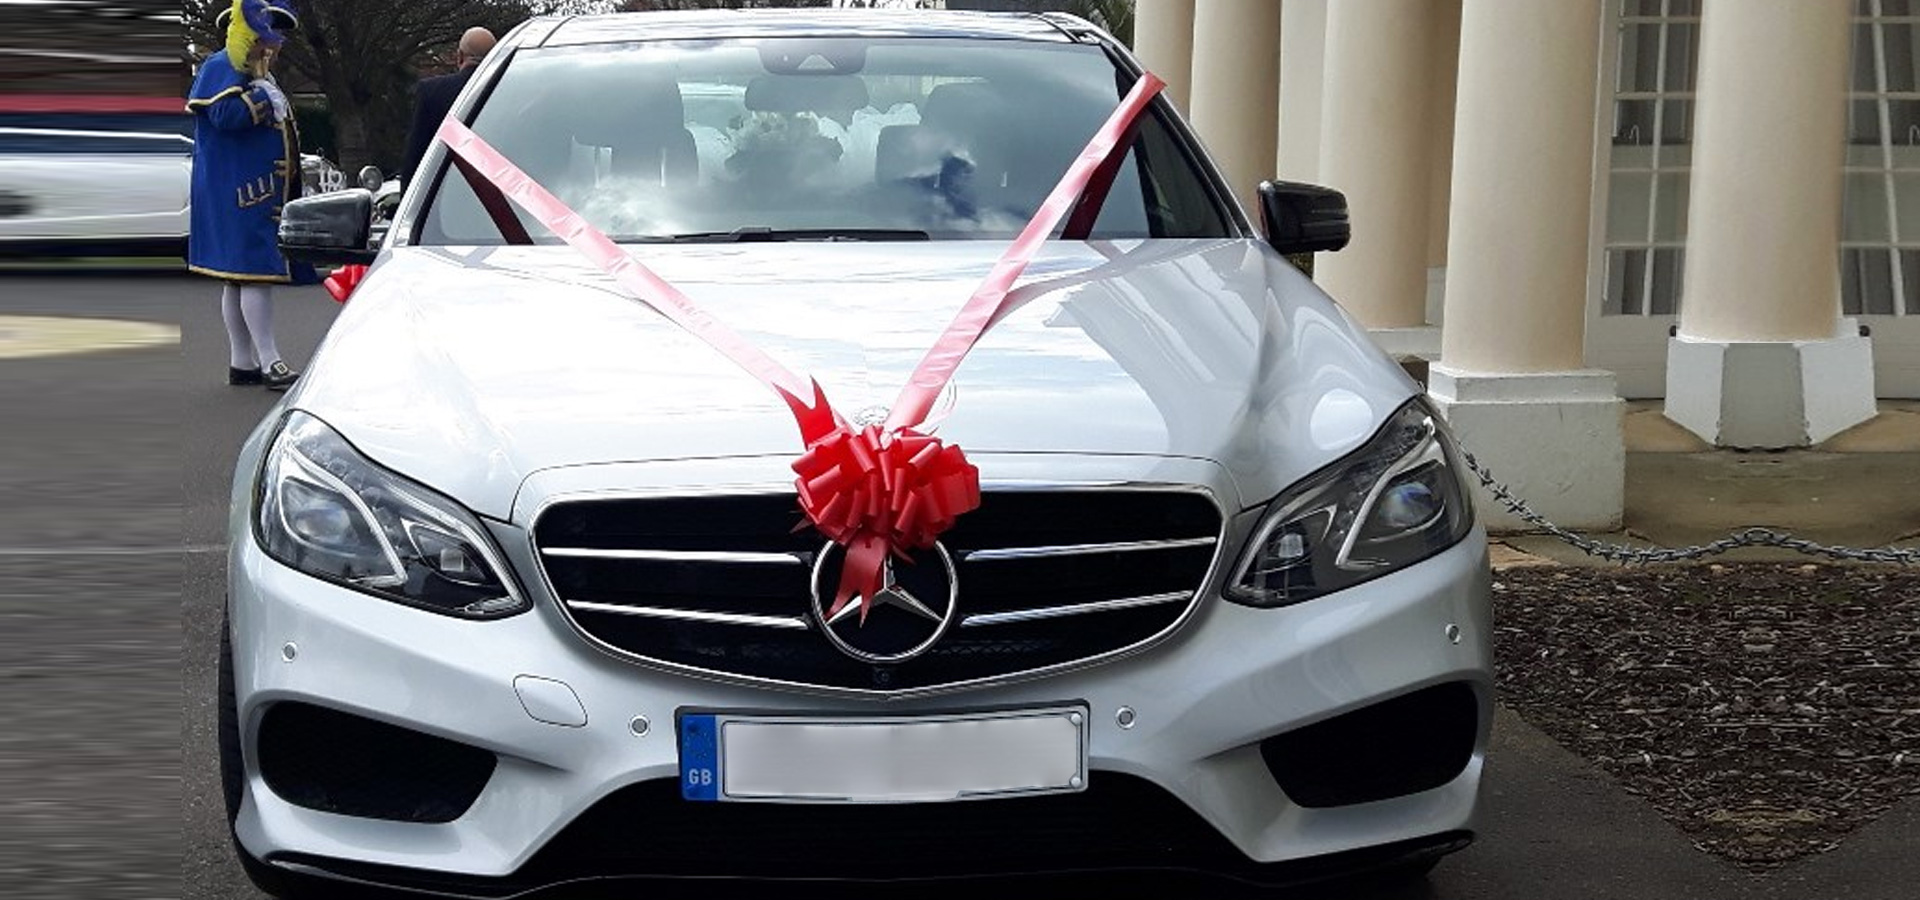 Wedding Car Hire Melbourne | Luxury Wedding Cars Melbourne – Silver Corporate Cabs